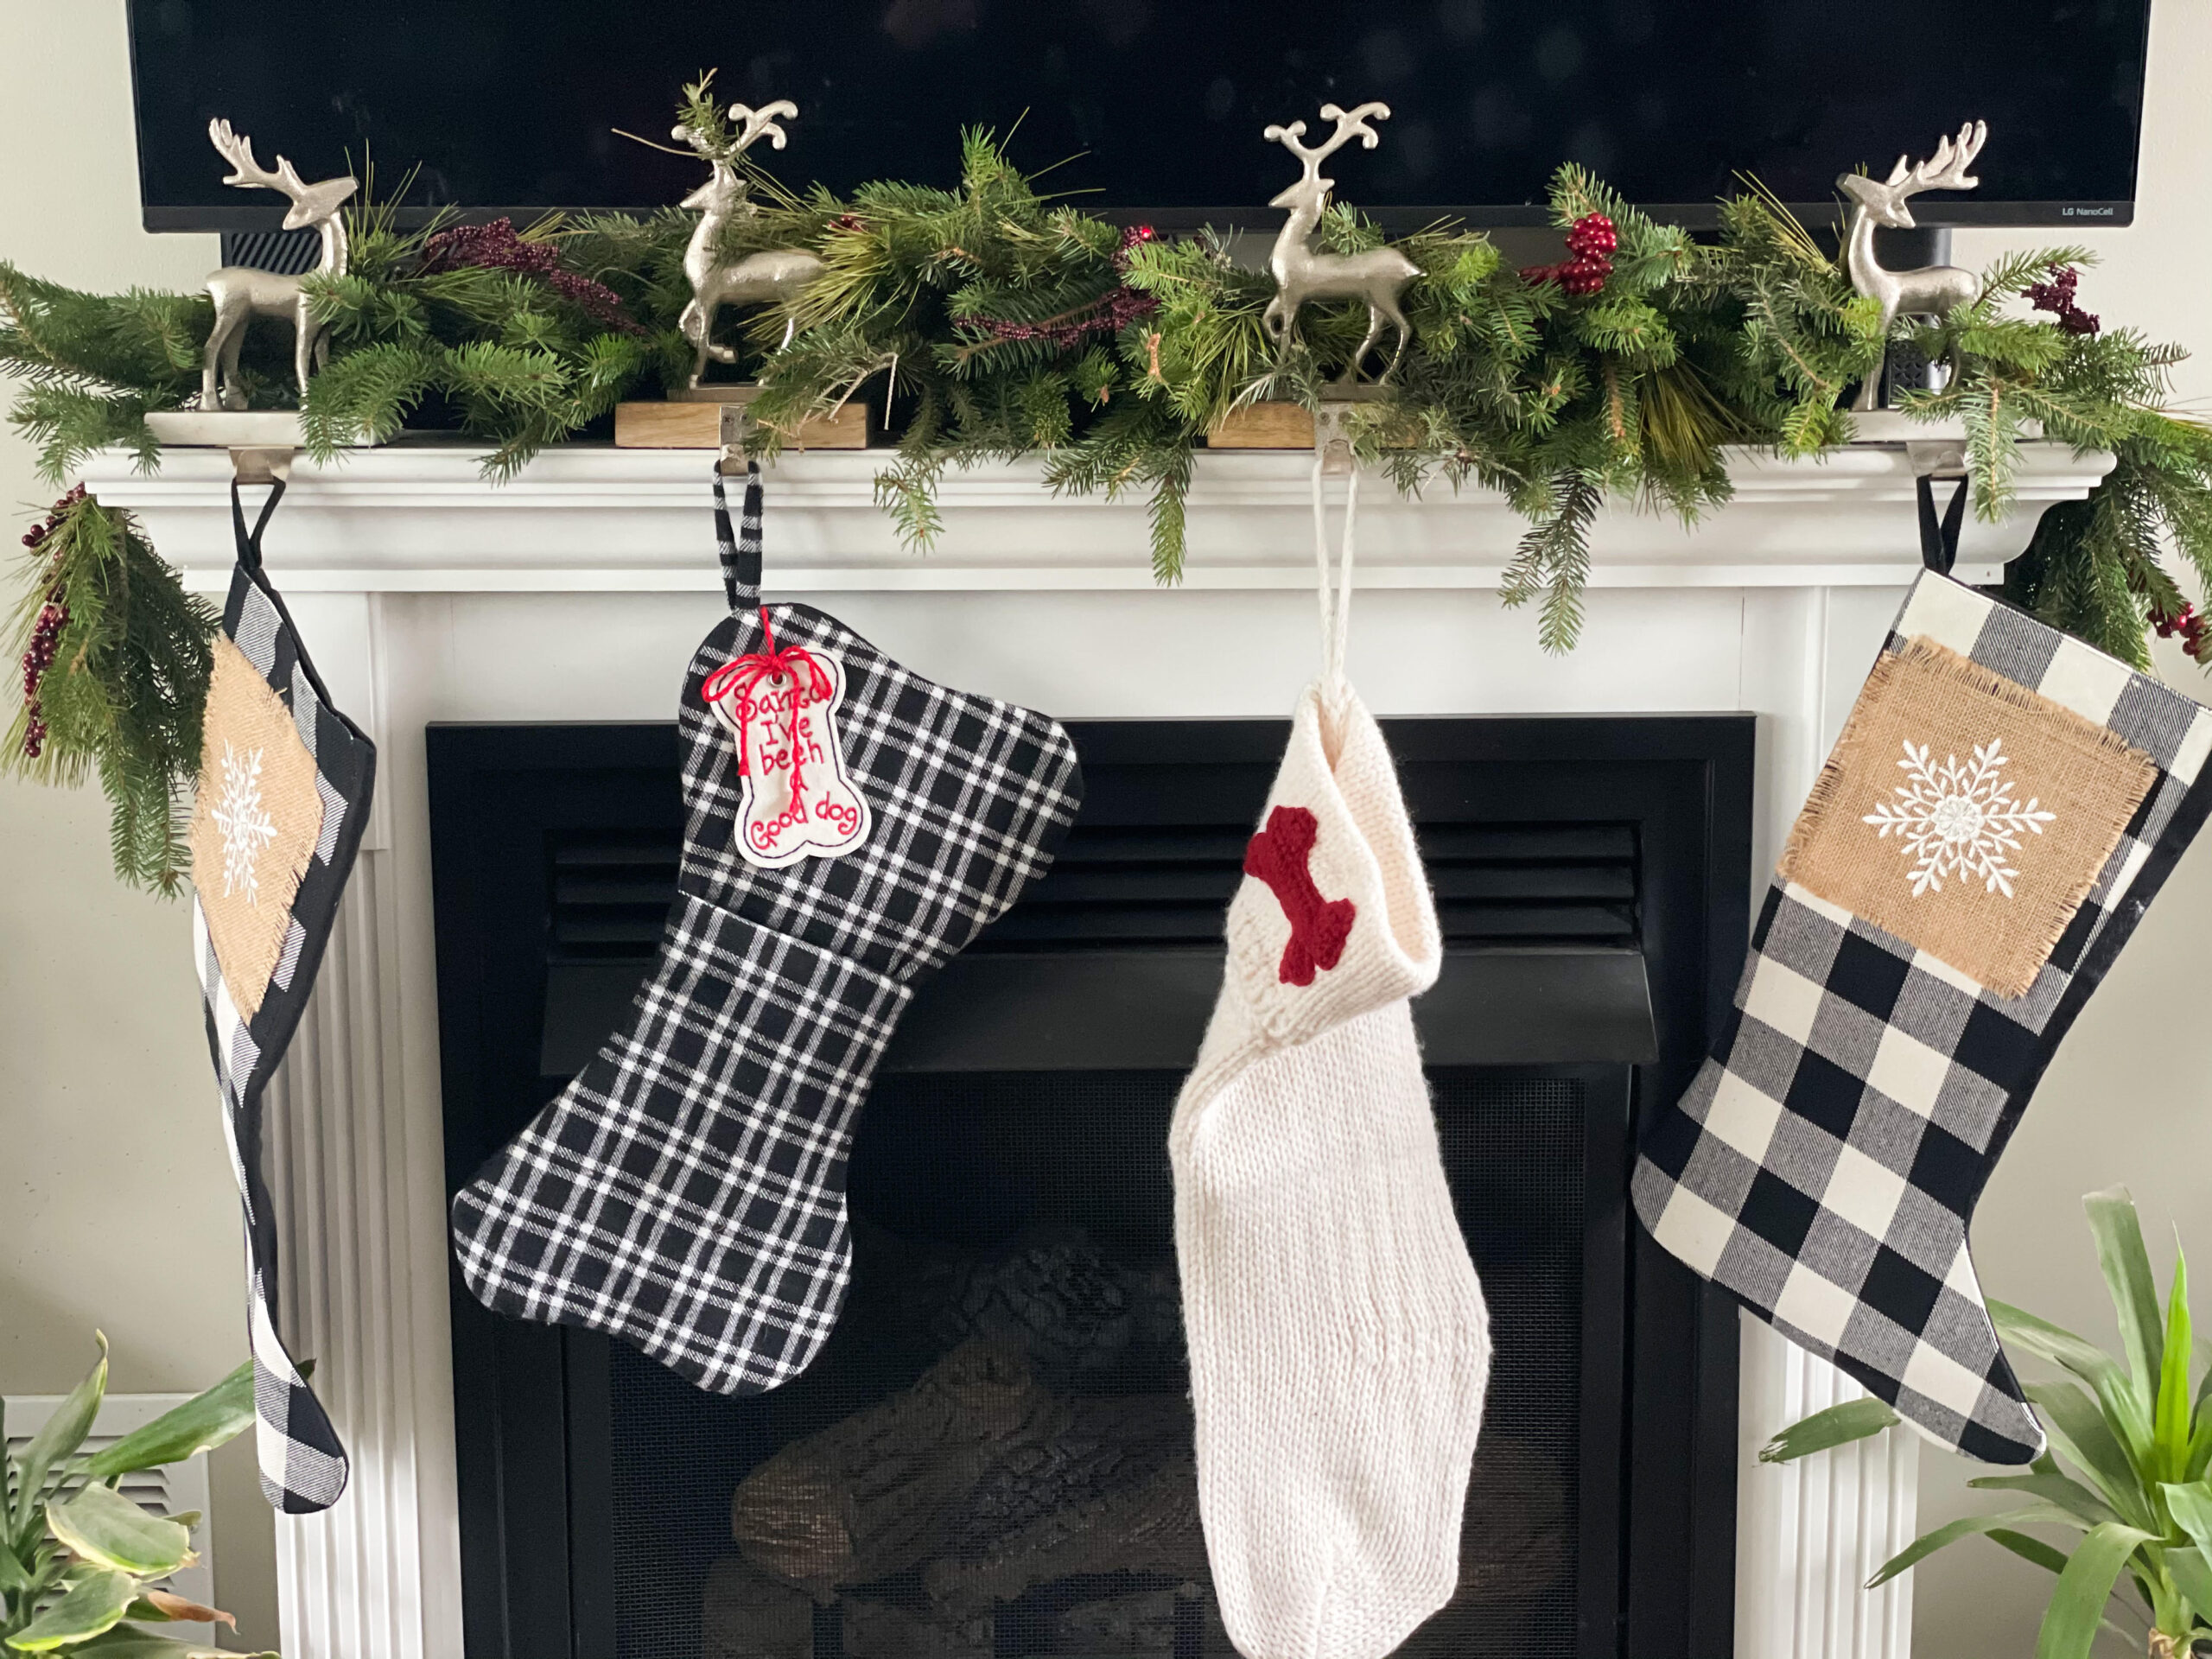 real pine garland on the mantle with stocking hanging 